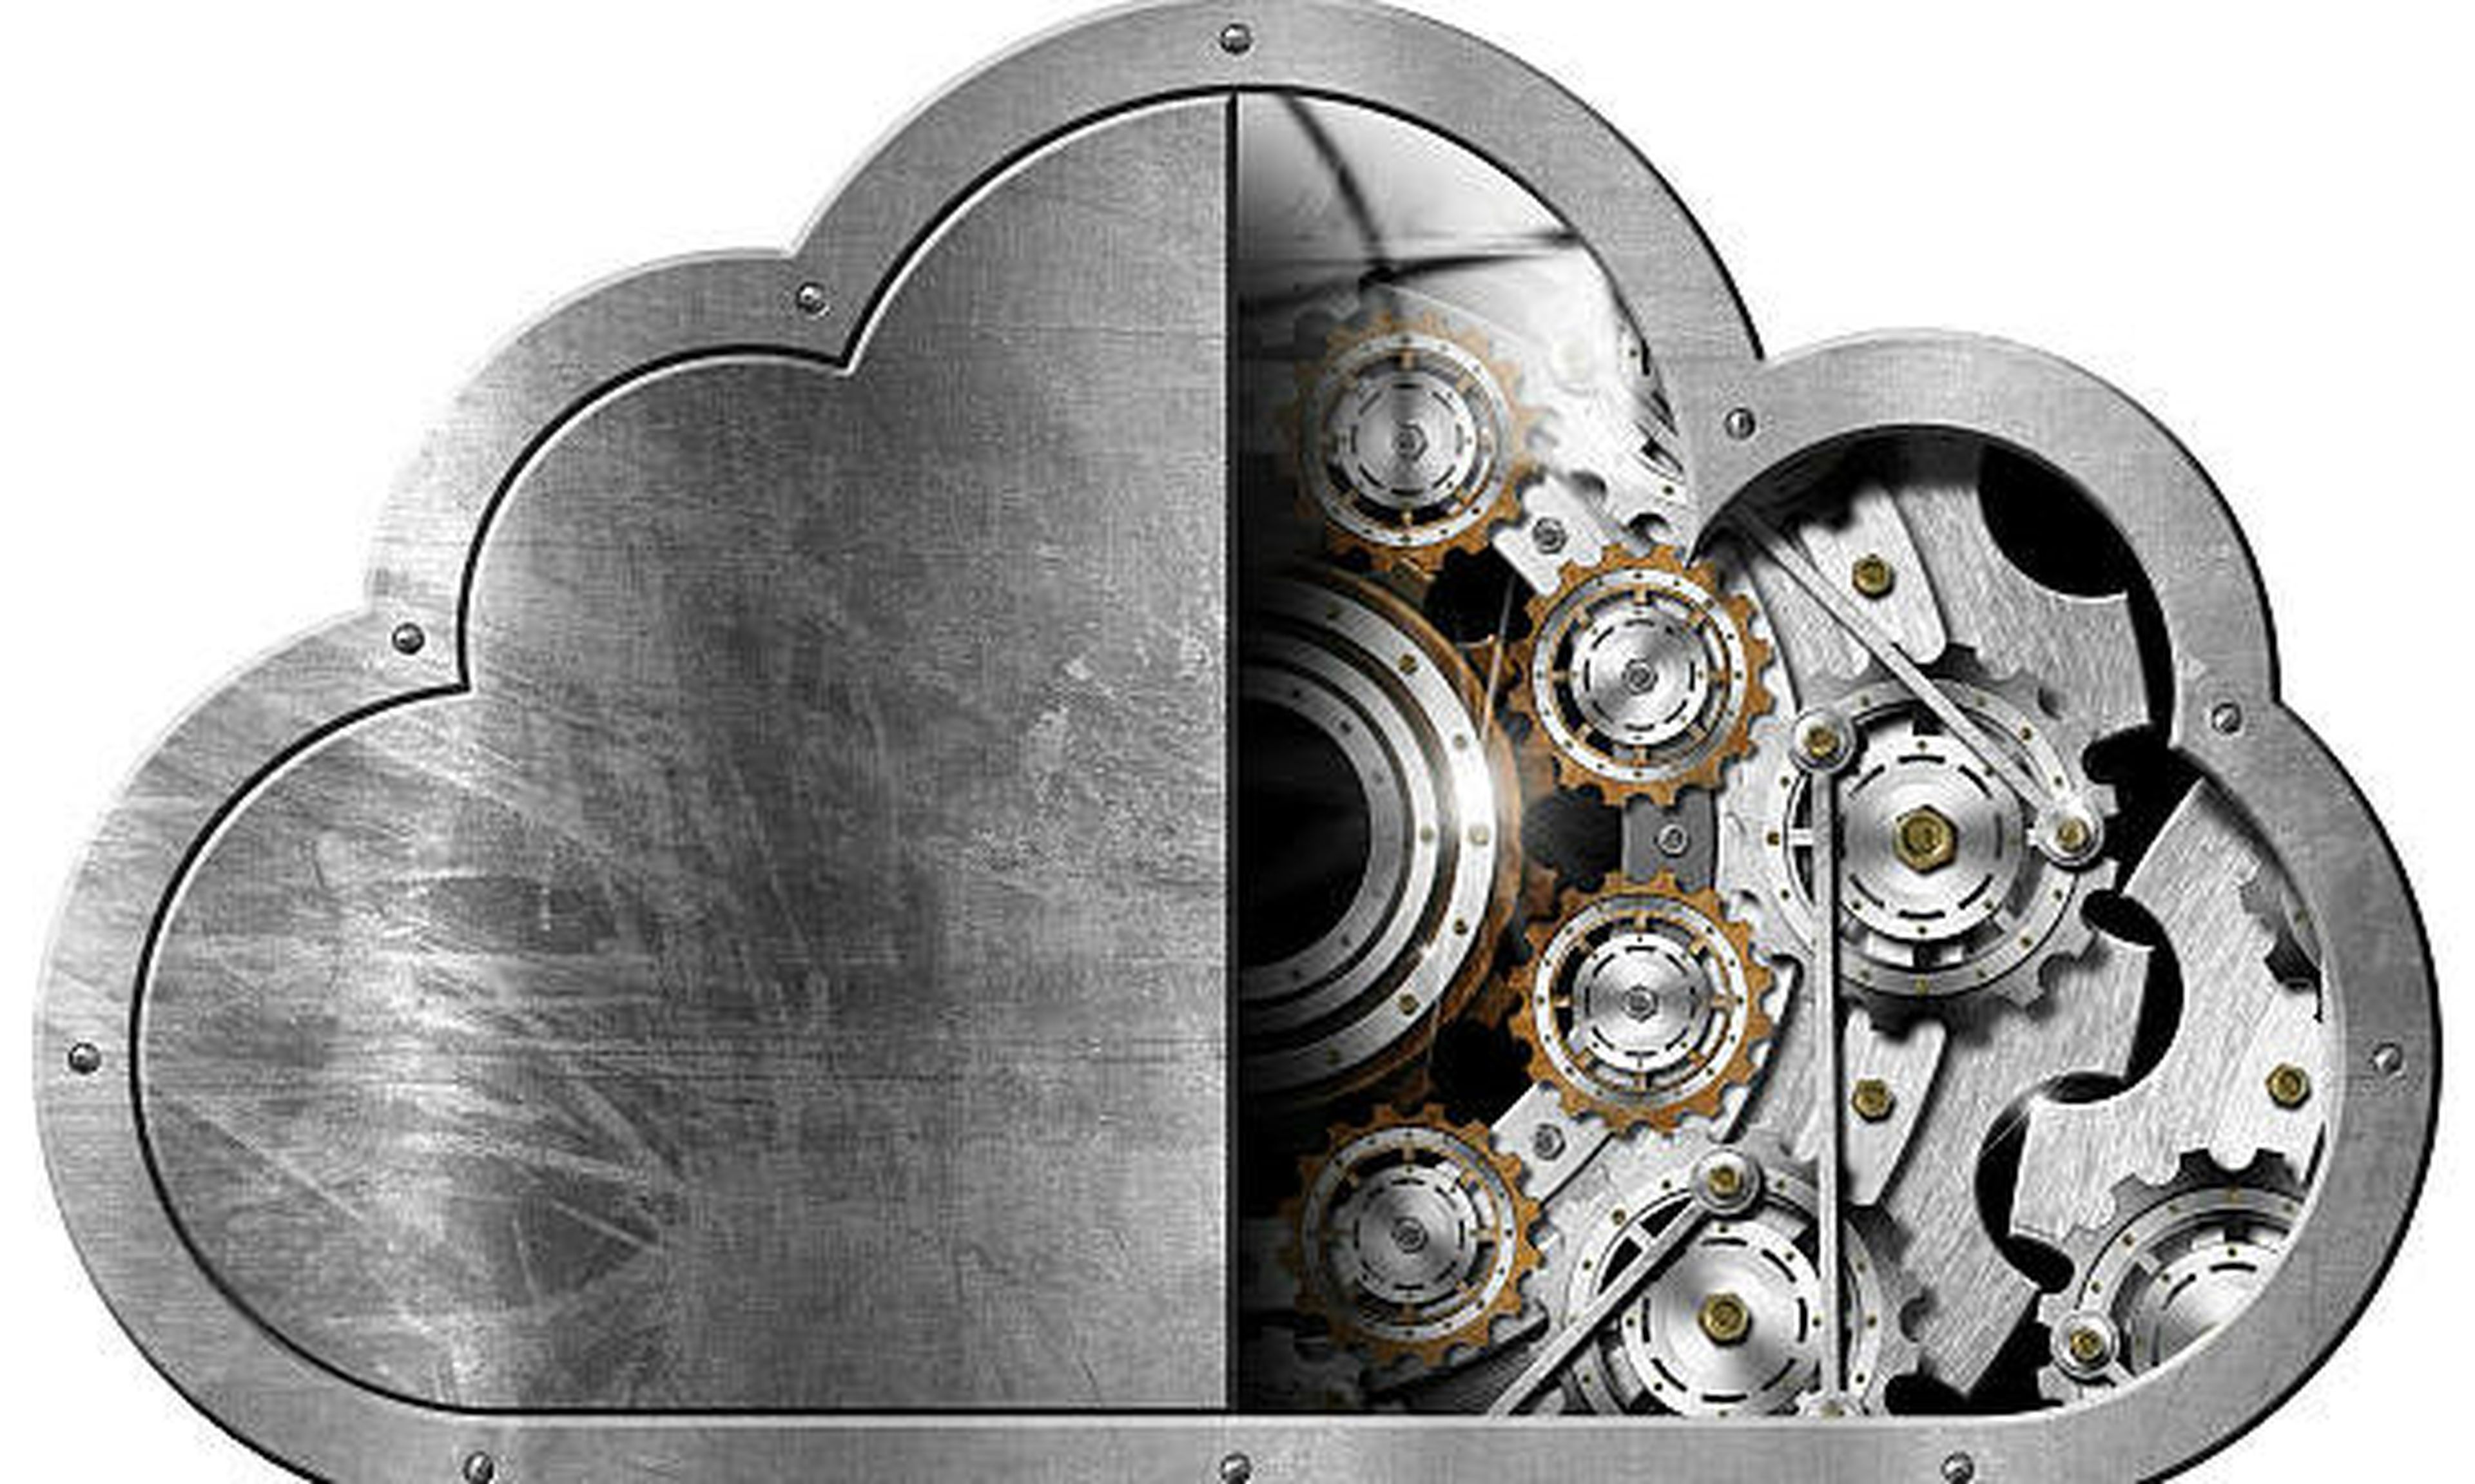 Metallic symbol in the shape of a cloud with metal gears. Concept of cloud computing